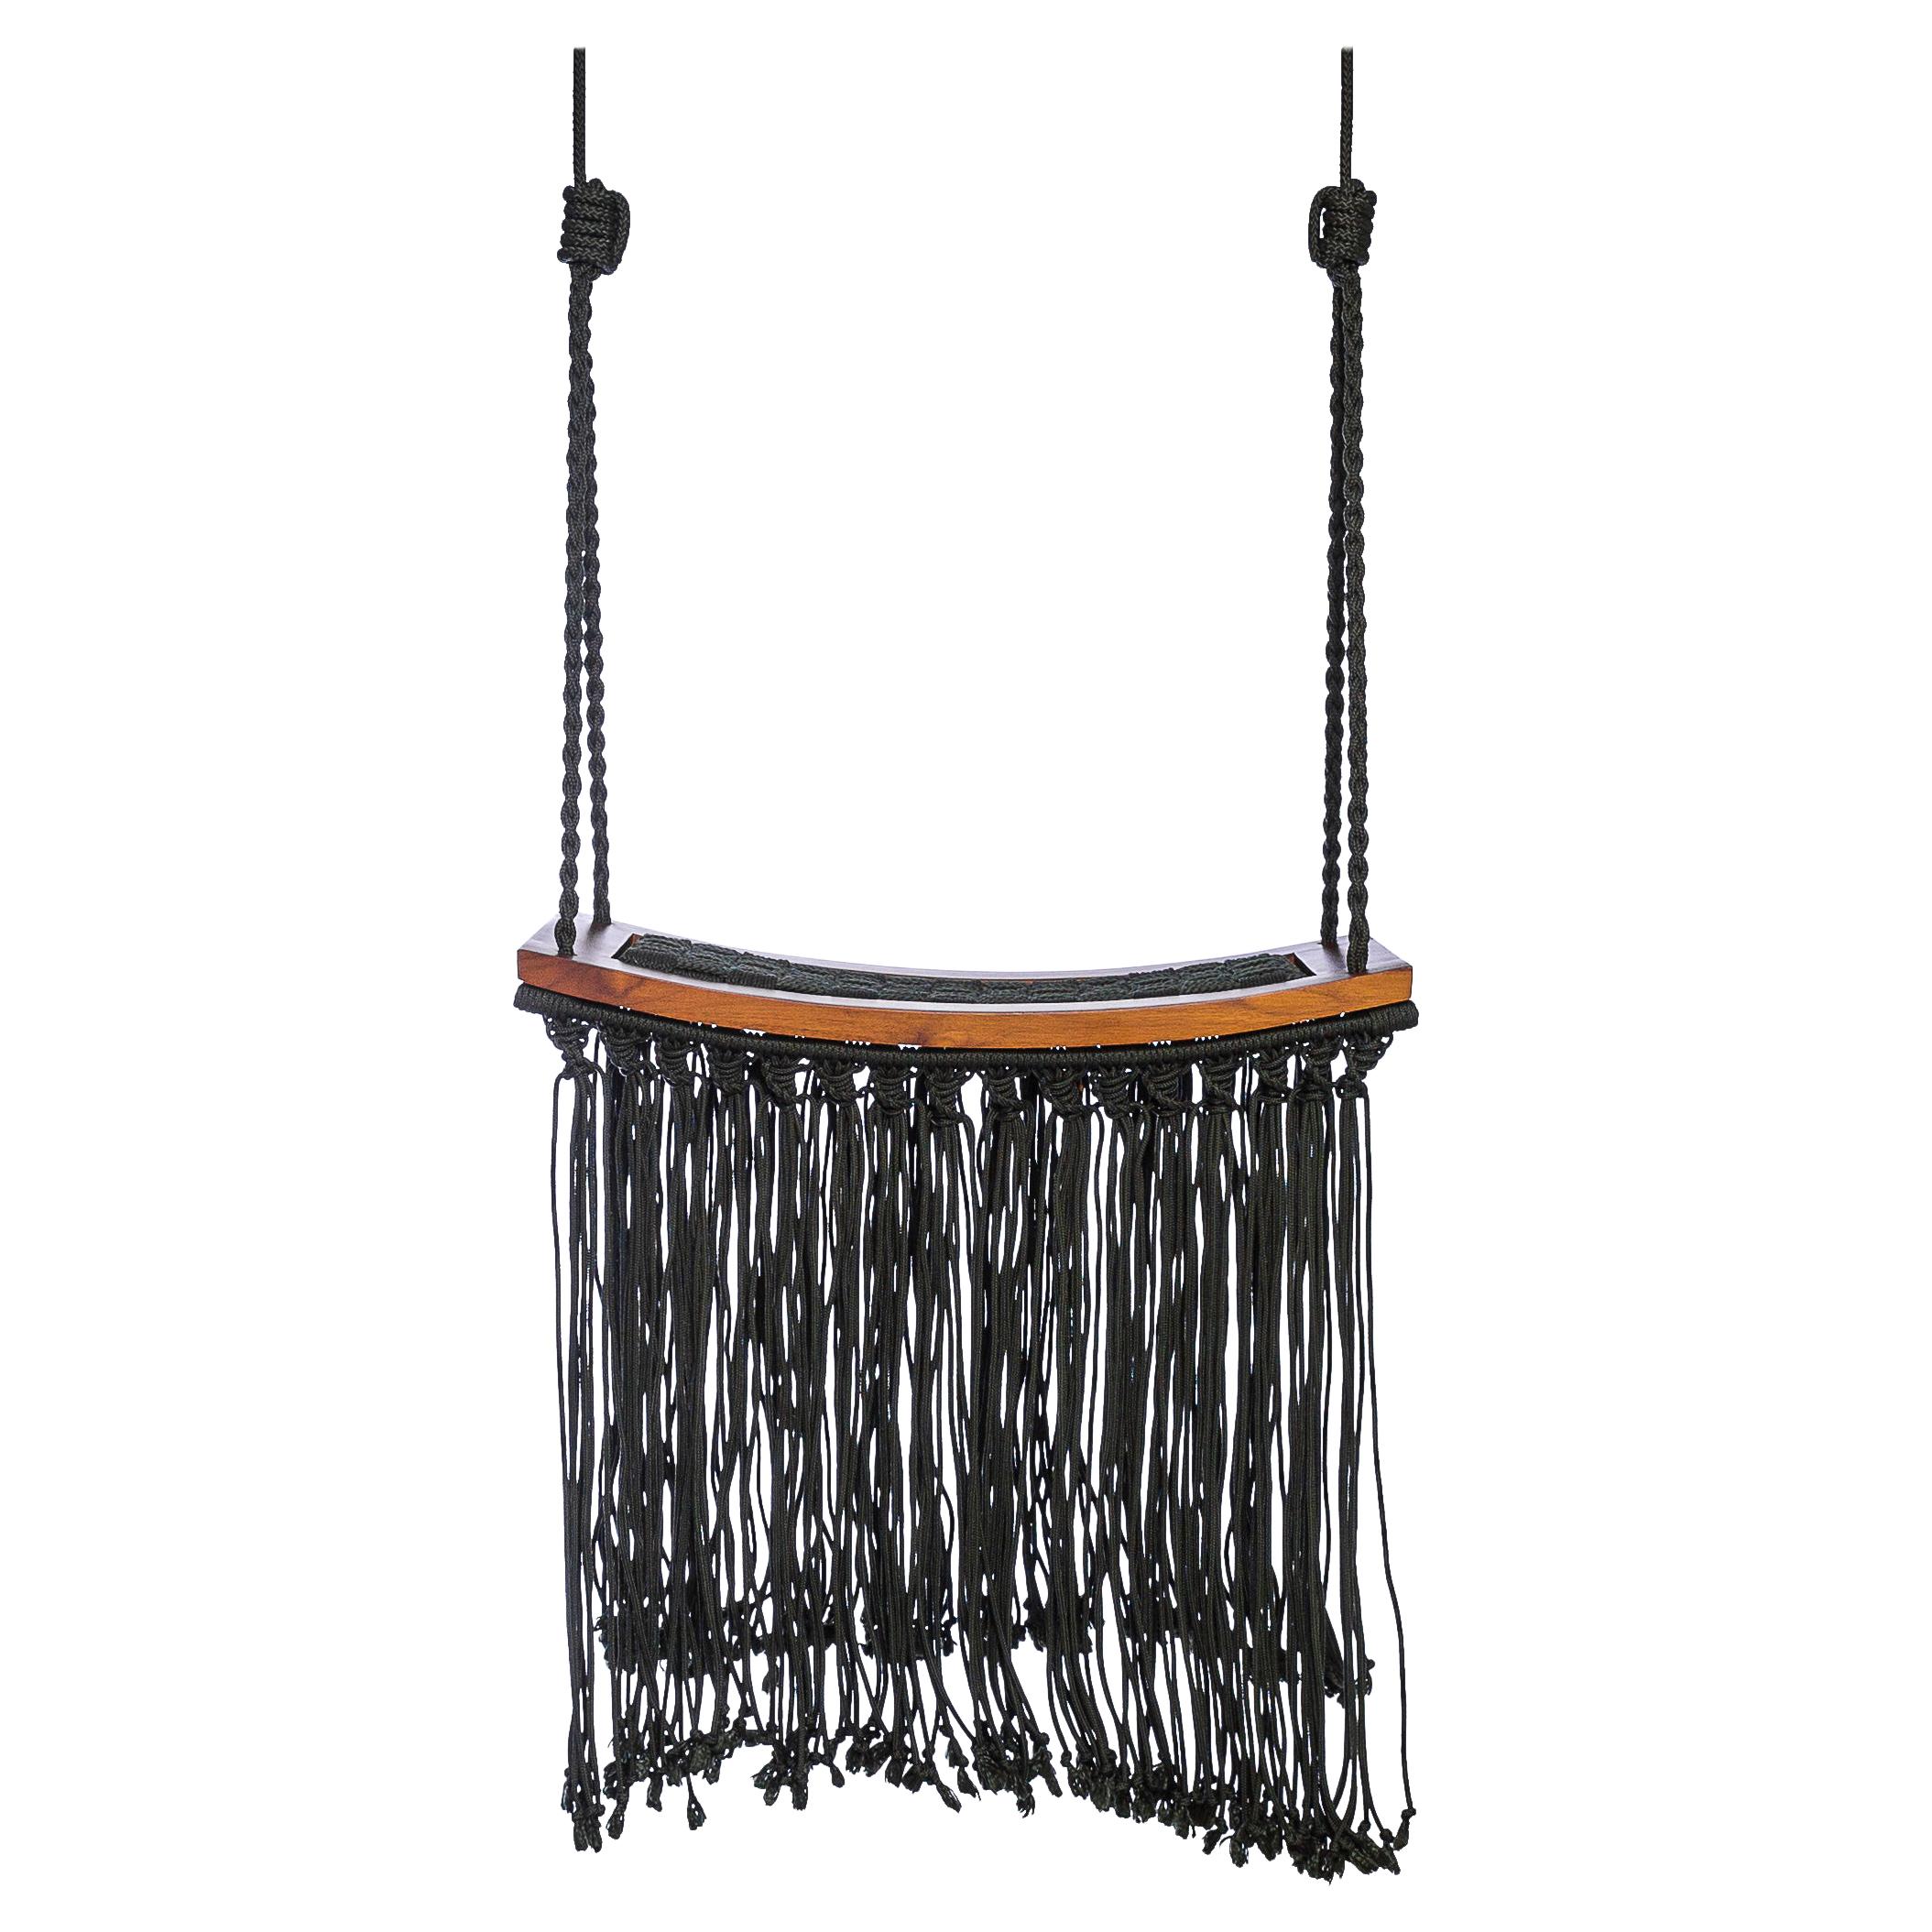 "Revoar" Hanging Swing Chair Outdoor Teak Wood and Naval Rope Fringes For Sale